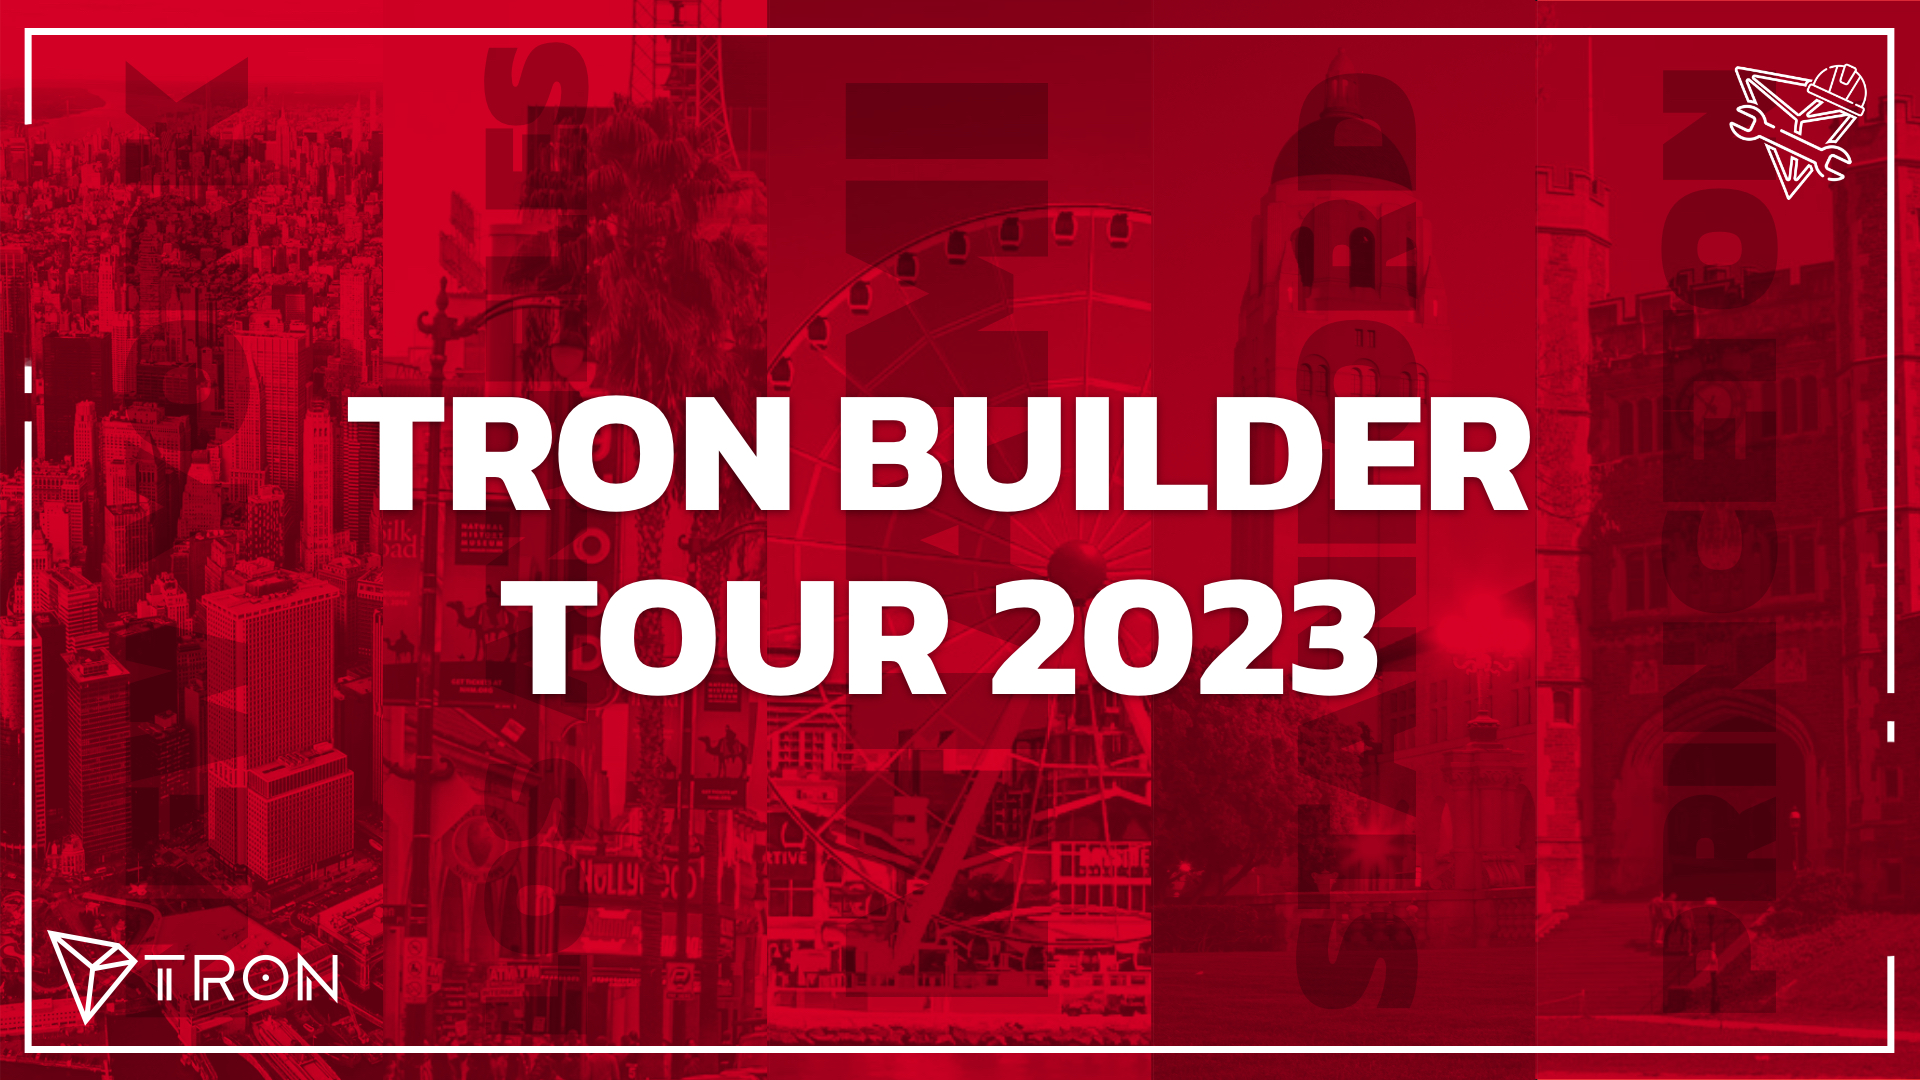 TRON Builder Tour: Reflecting on Past Stops and Looking Ahead to Stanford, Princeton, and Barcelona